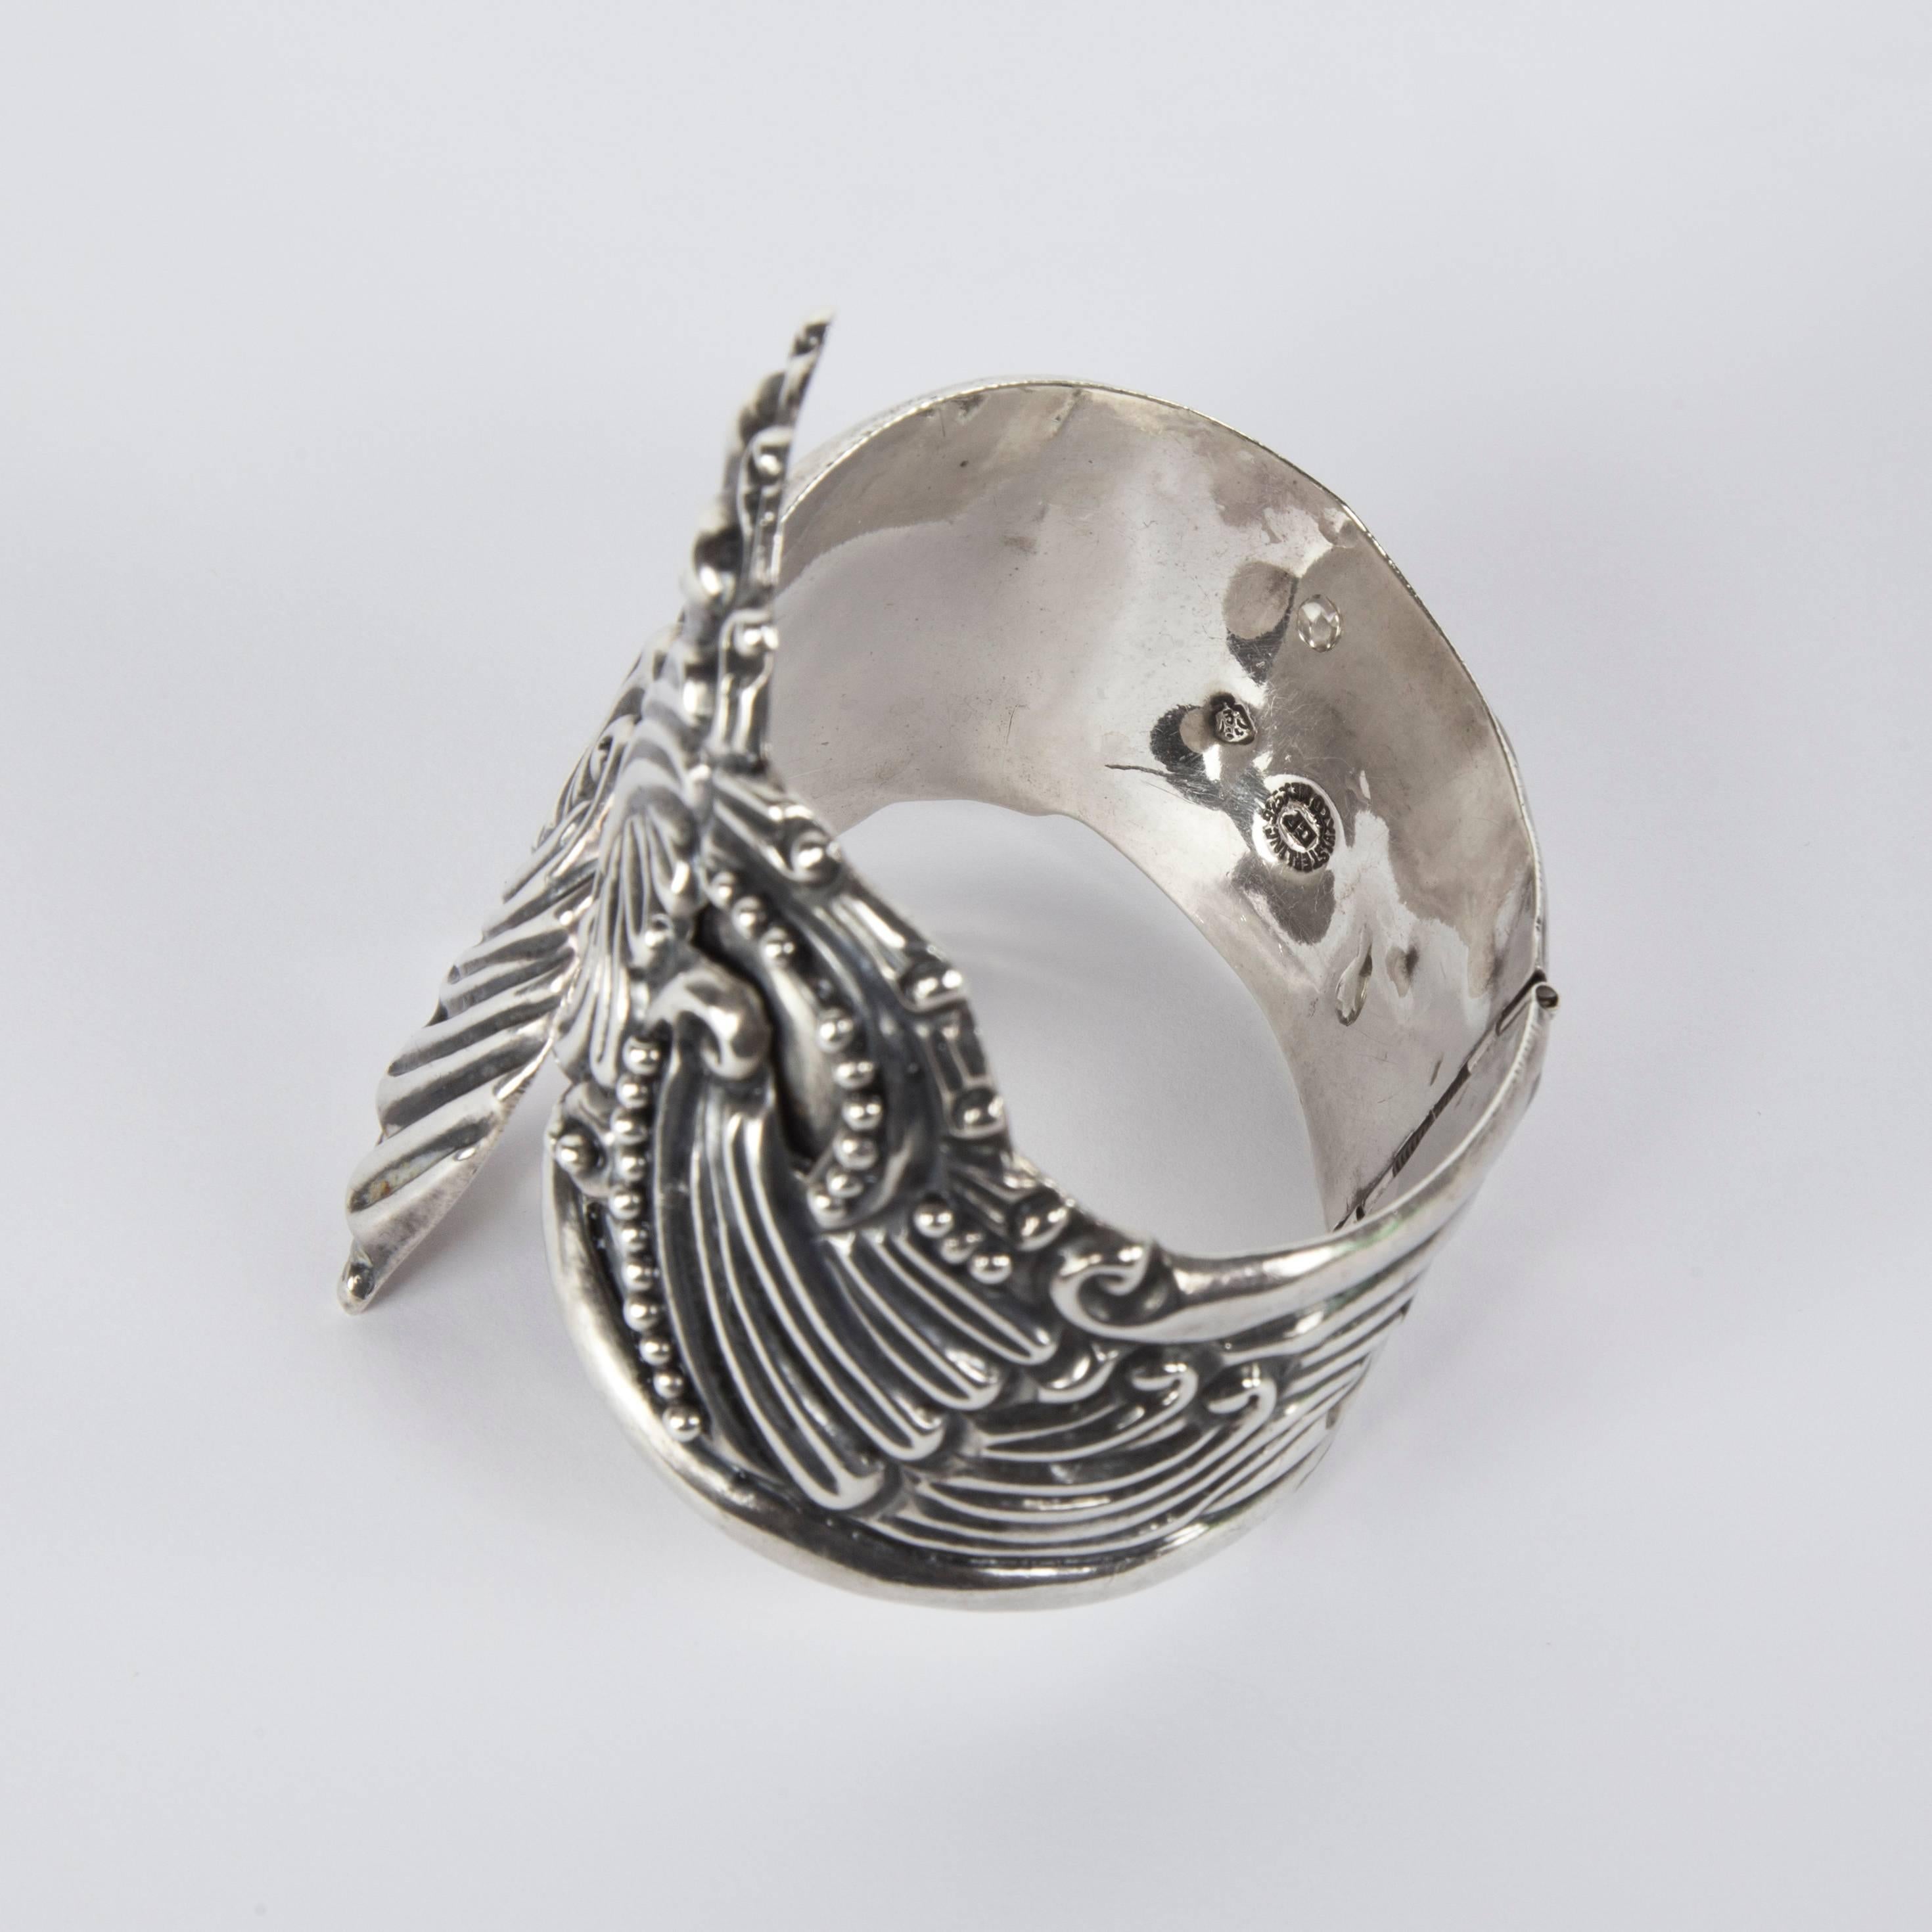 Clamper bracelet featuring flowing Repousse lines with recessed ball accents swirl around the cuff; Interior marked: STERLING 925 TEXCO MEX GP, including an eagle stamp; approx. closed opening size:  2 x 2.25-2.50 inches; hinge system; fits small to